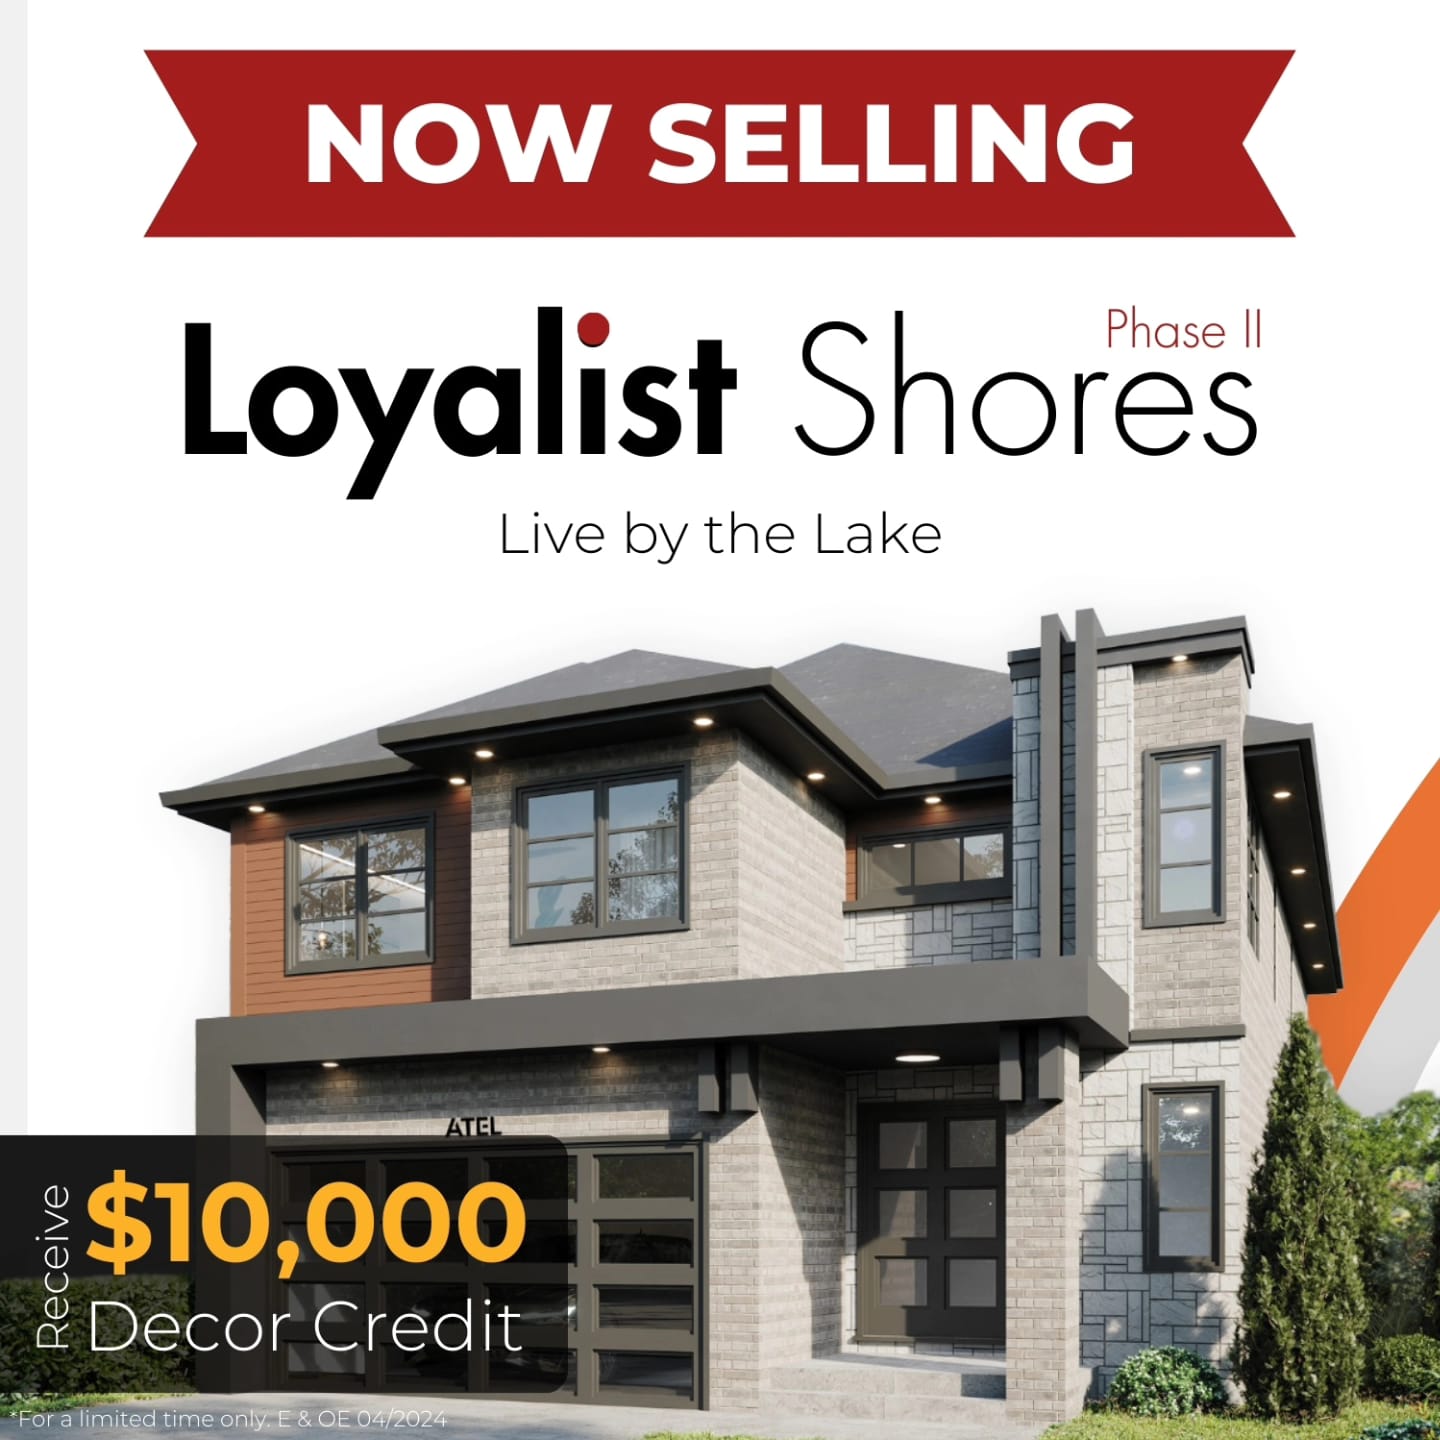 Loyalist Shores new homes sale, $10,000 decor credit offer.